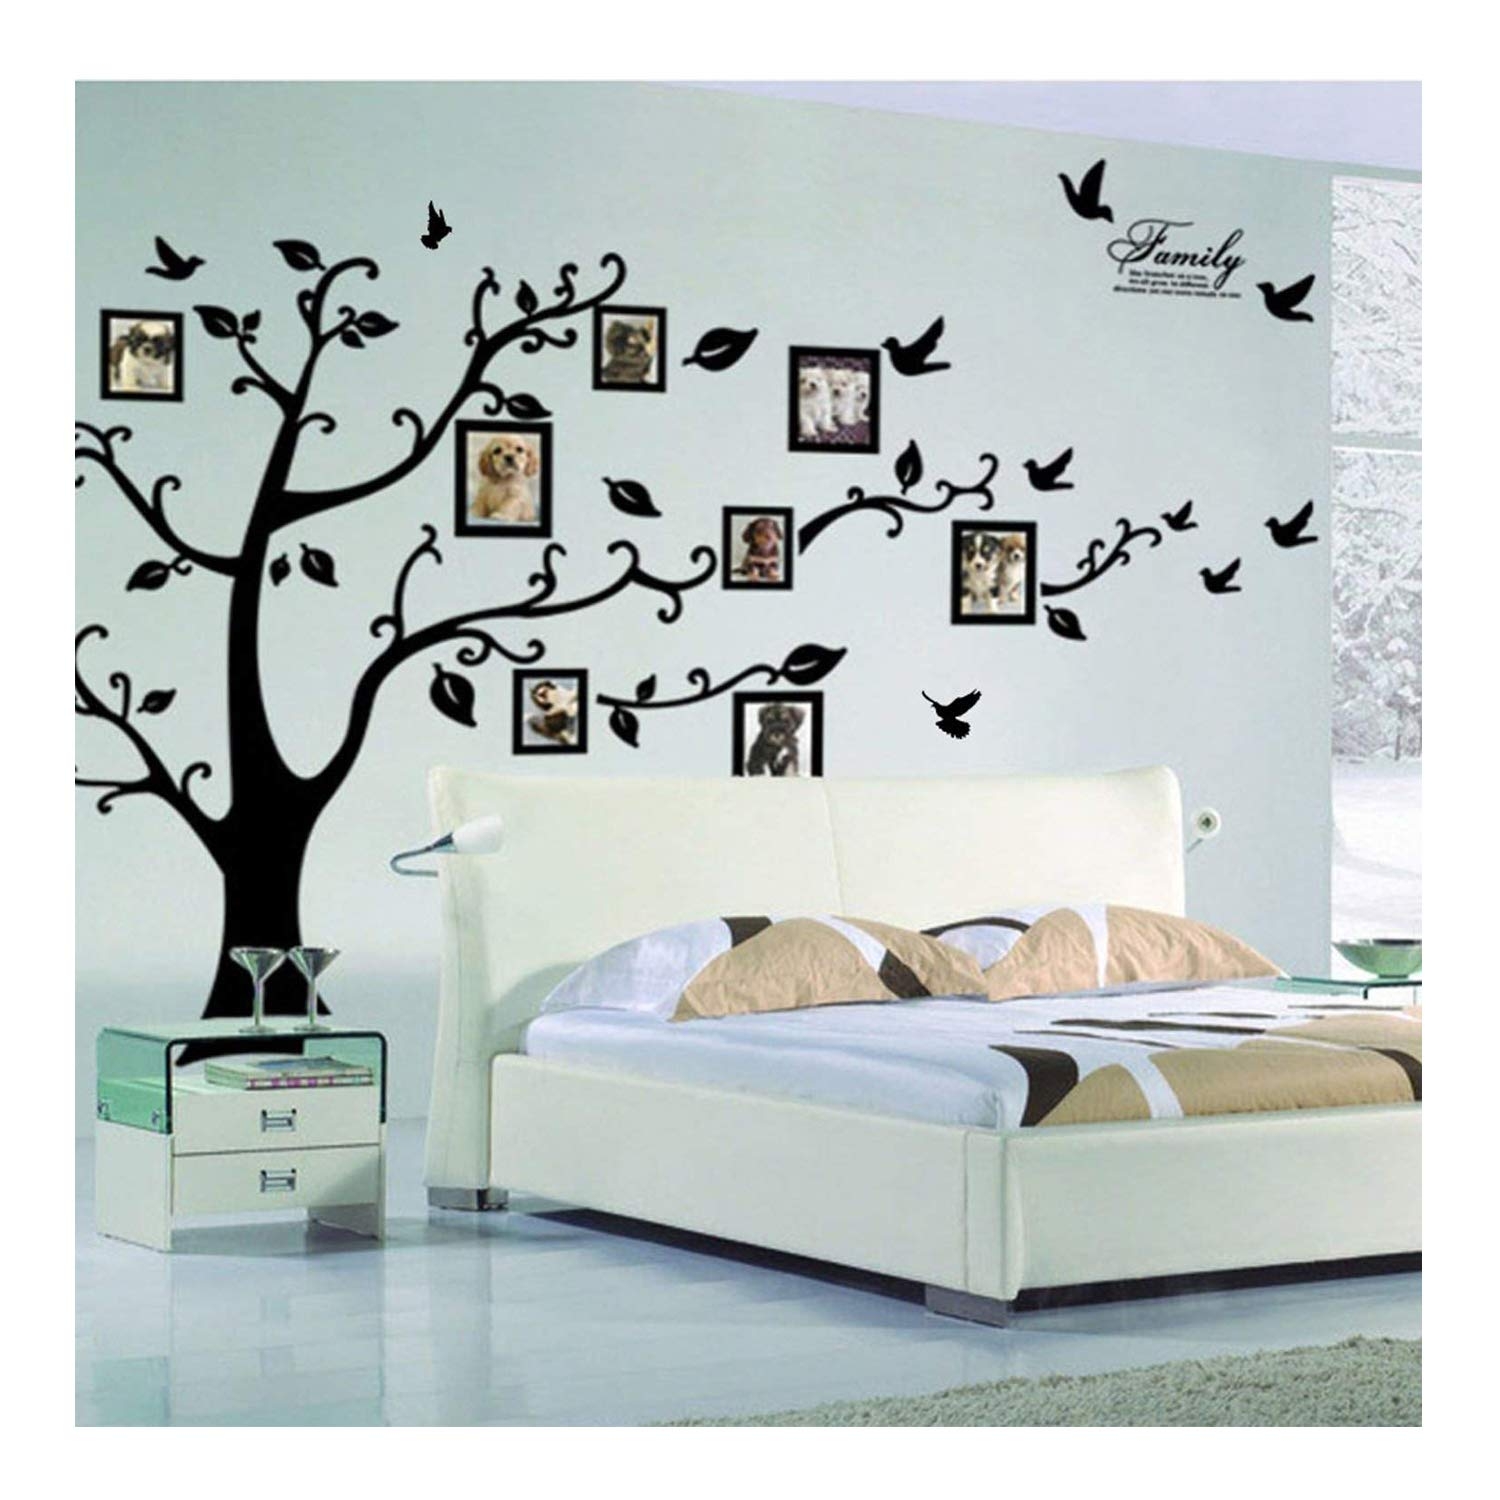 3D Photo Family Tree Wall Decal Sticker Photo Frames Mural DIY Home Decoration